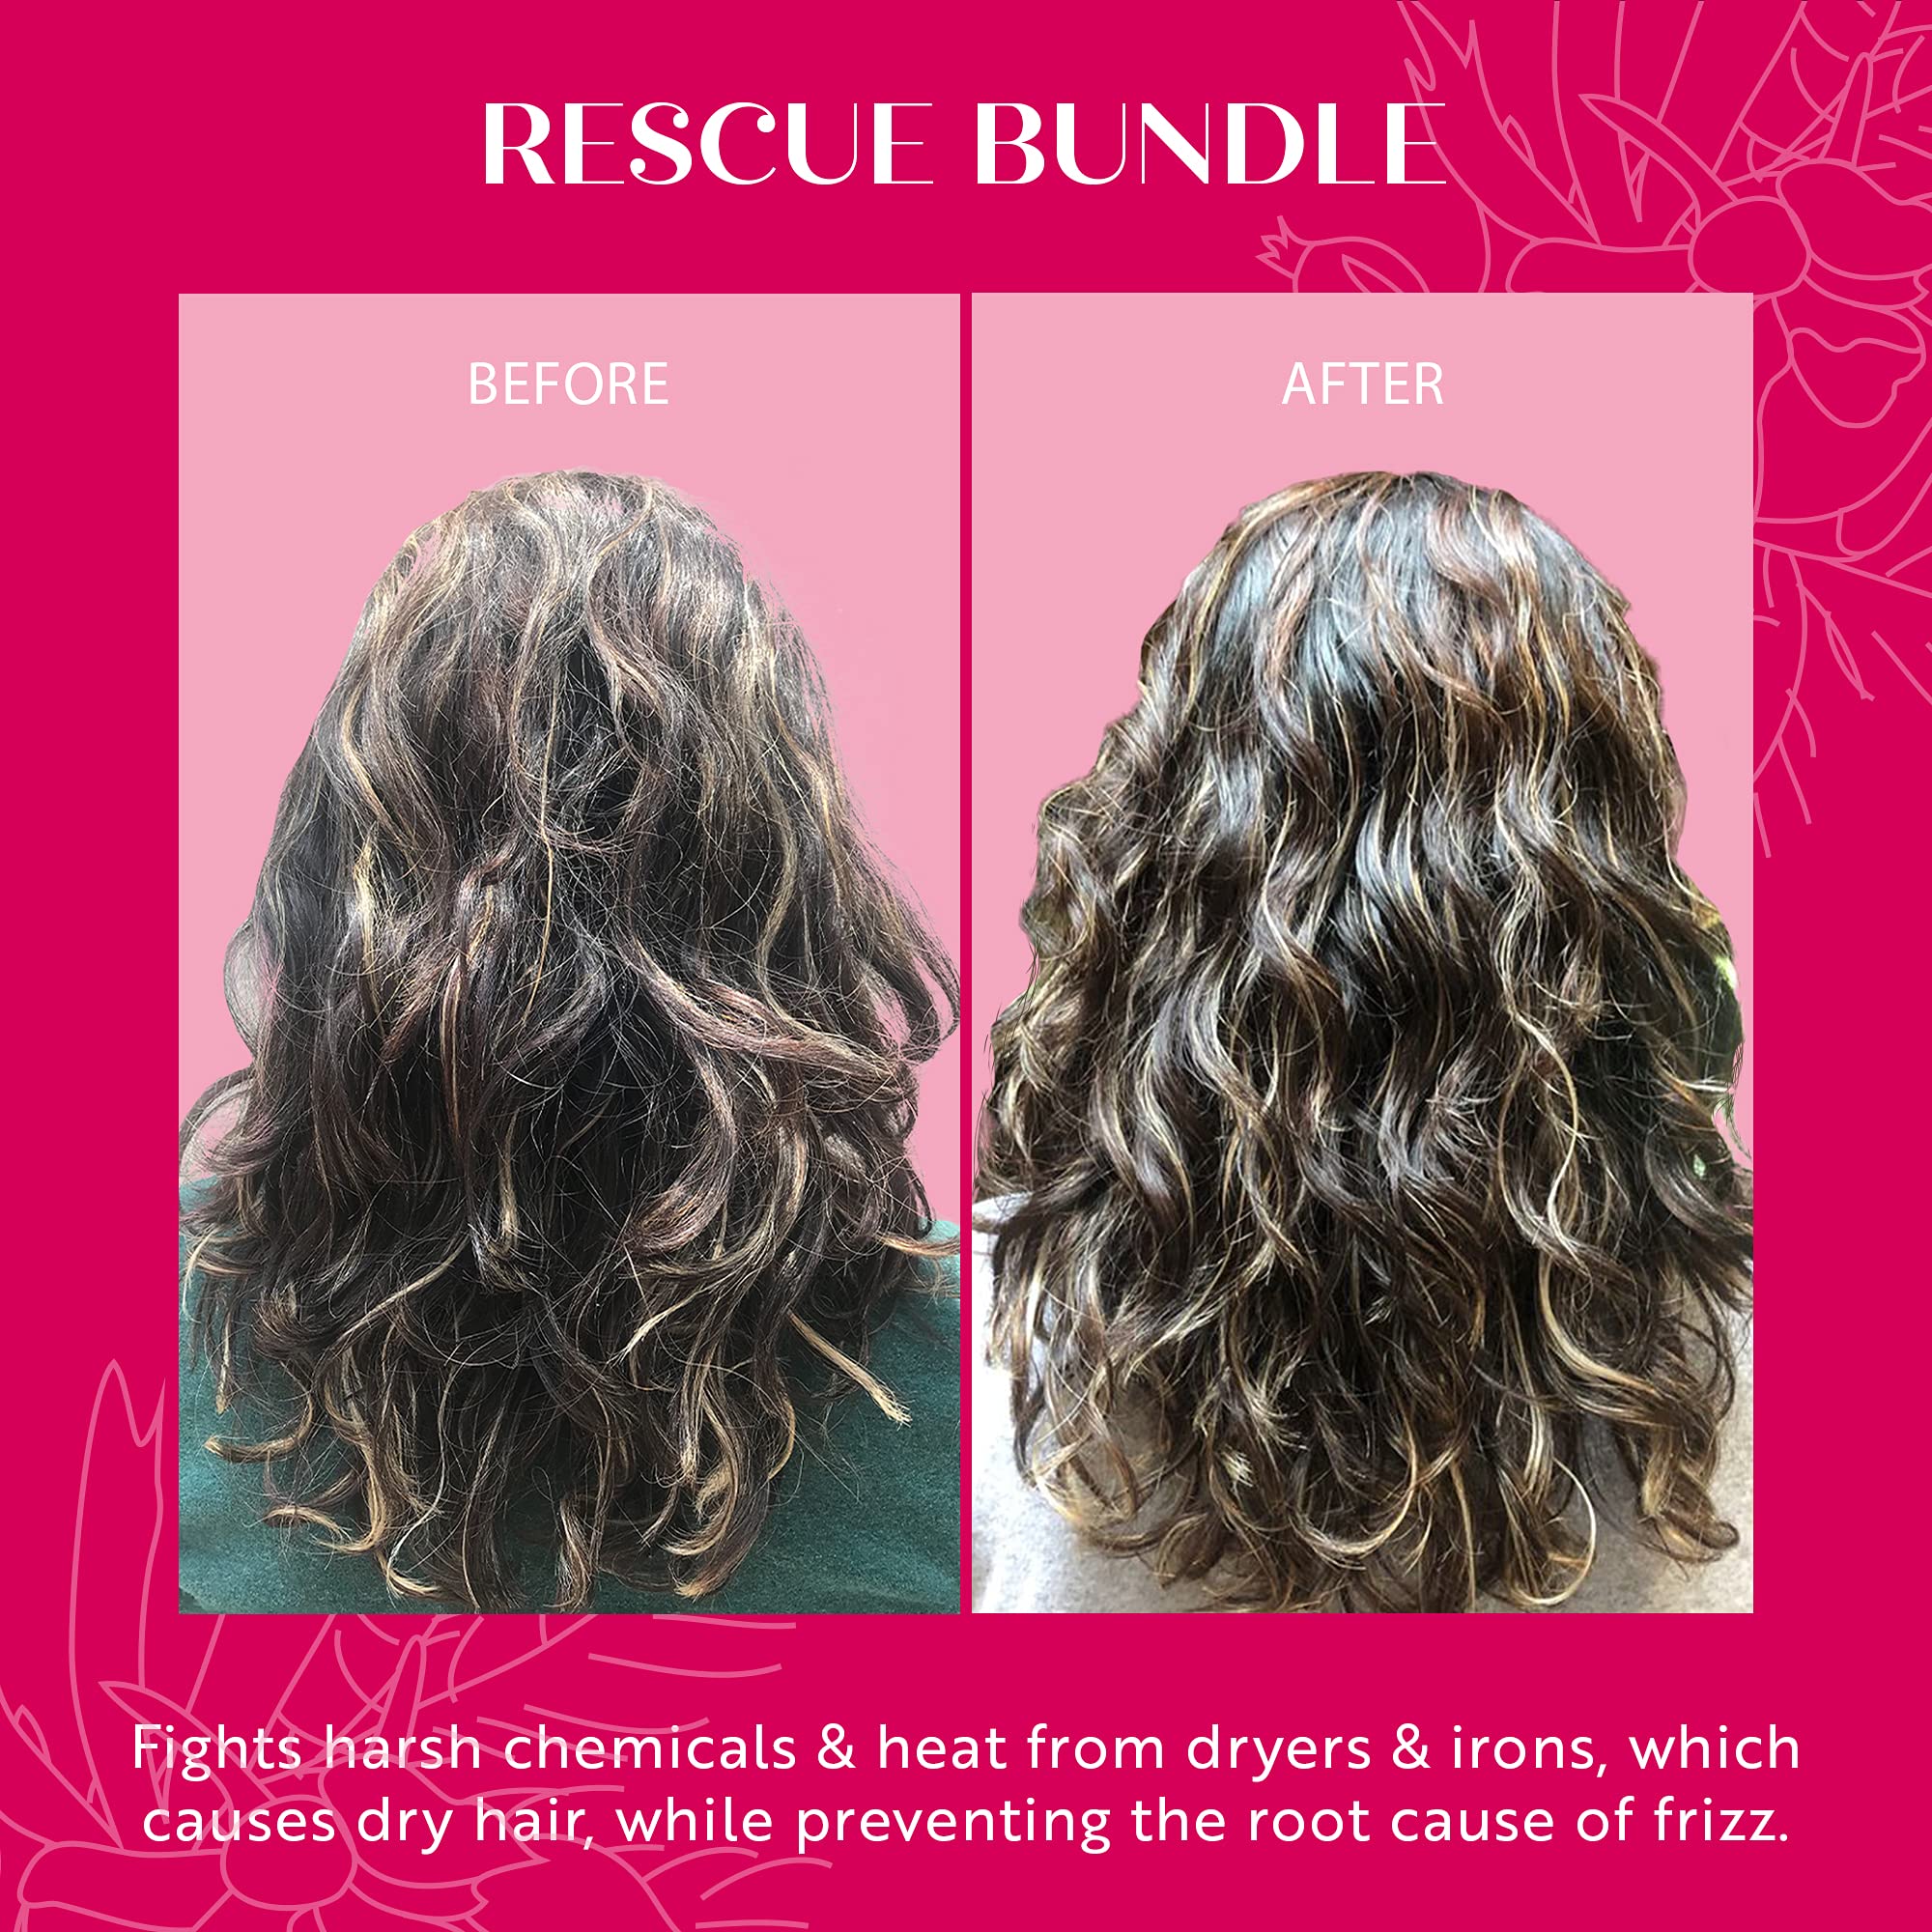 LATINUS BEAUTY RESCUE Impossible Keratin Anti-Frizz Shampoo + Conditioner Bundle for Dry, Damaged Hair (12 oz each)